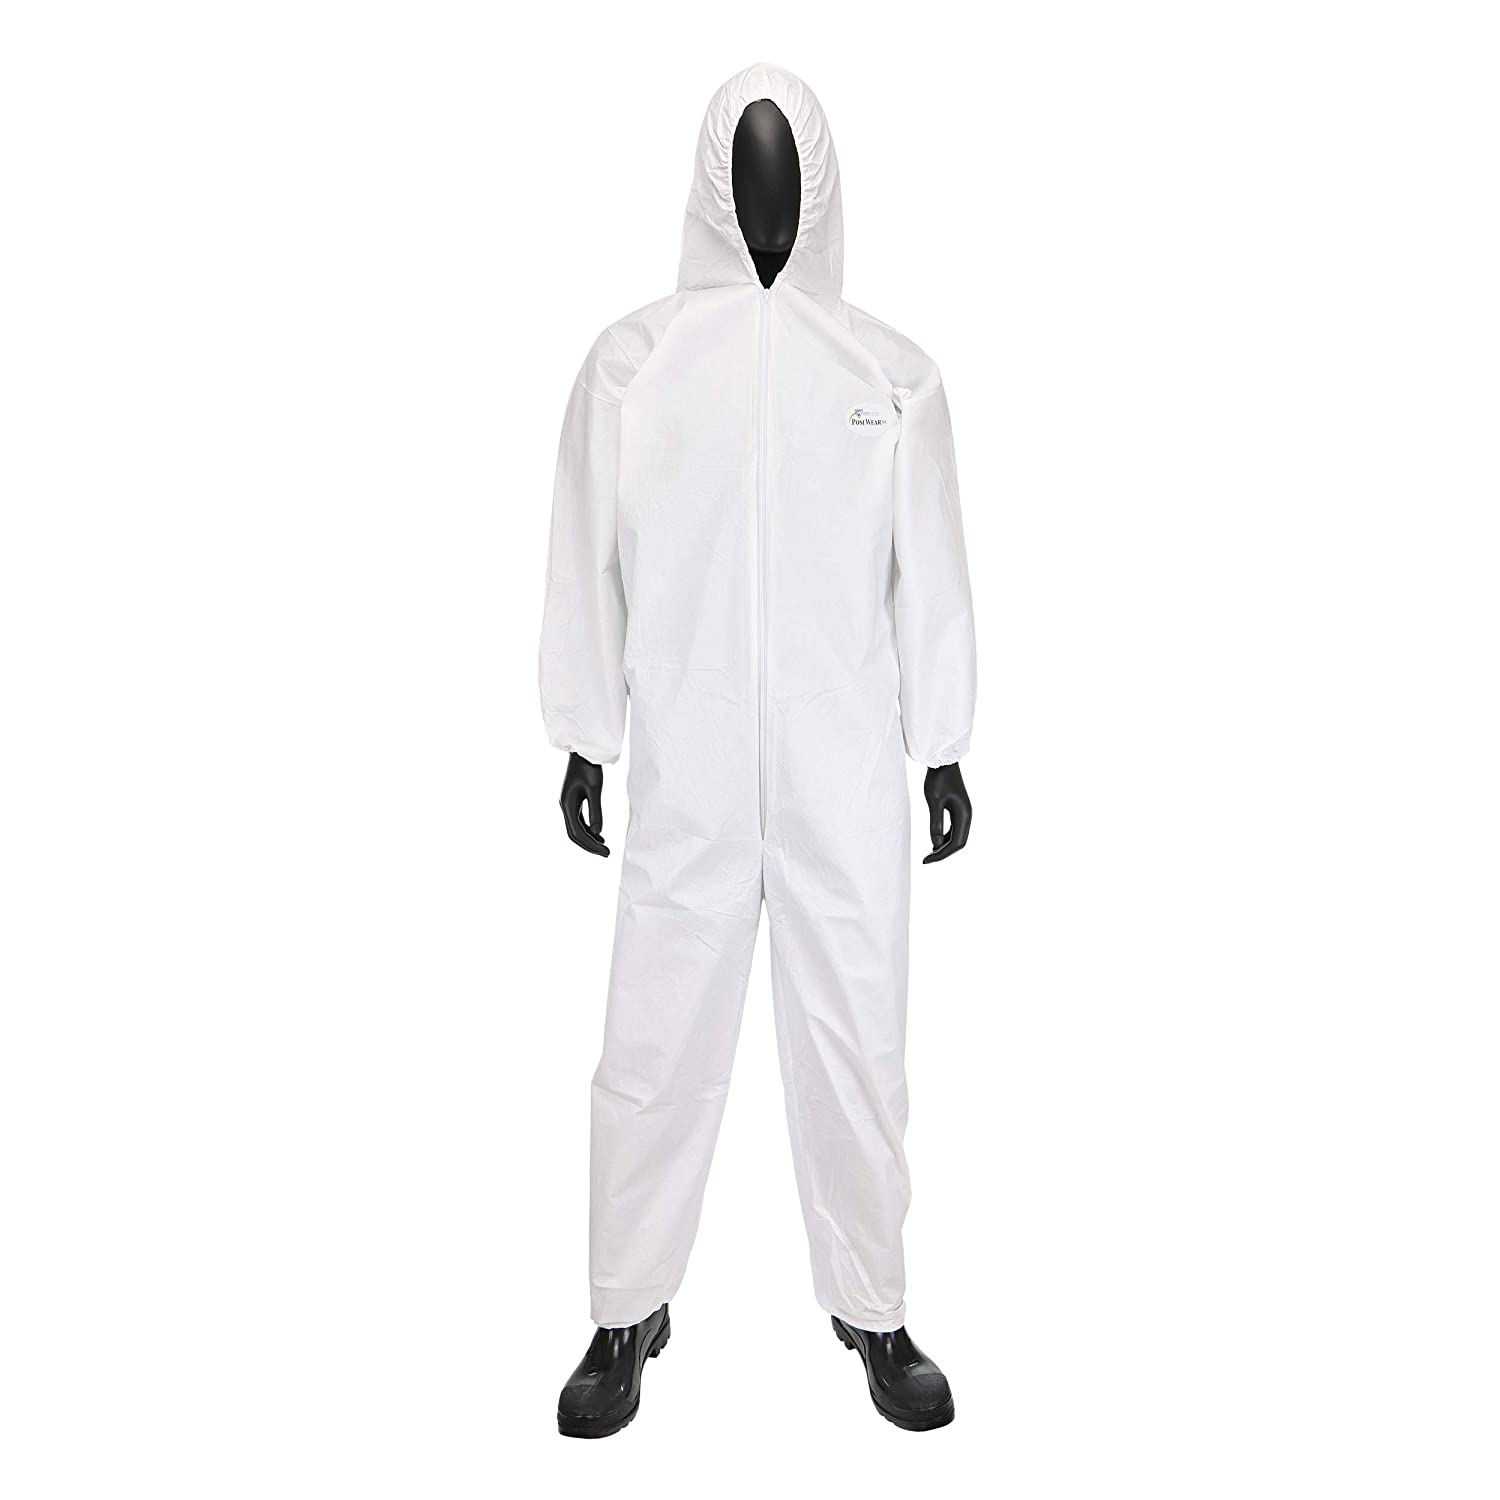 West Chester 3606 Polypropylene PosiWear BA: Breathable Advantage Microporous Coverall – [Pack of 25] XXX-Large, Safety Overall with Zipper Front, Elastic Wrist, Ankle, Attached Hood